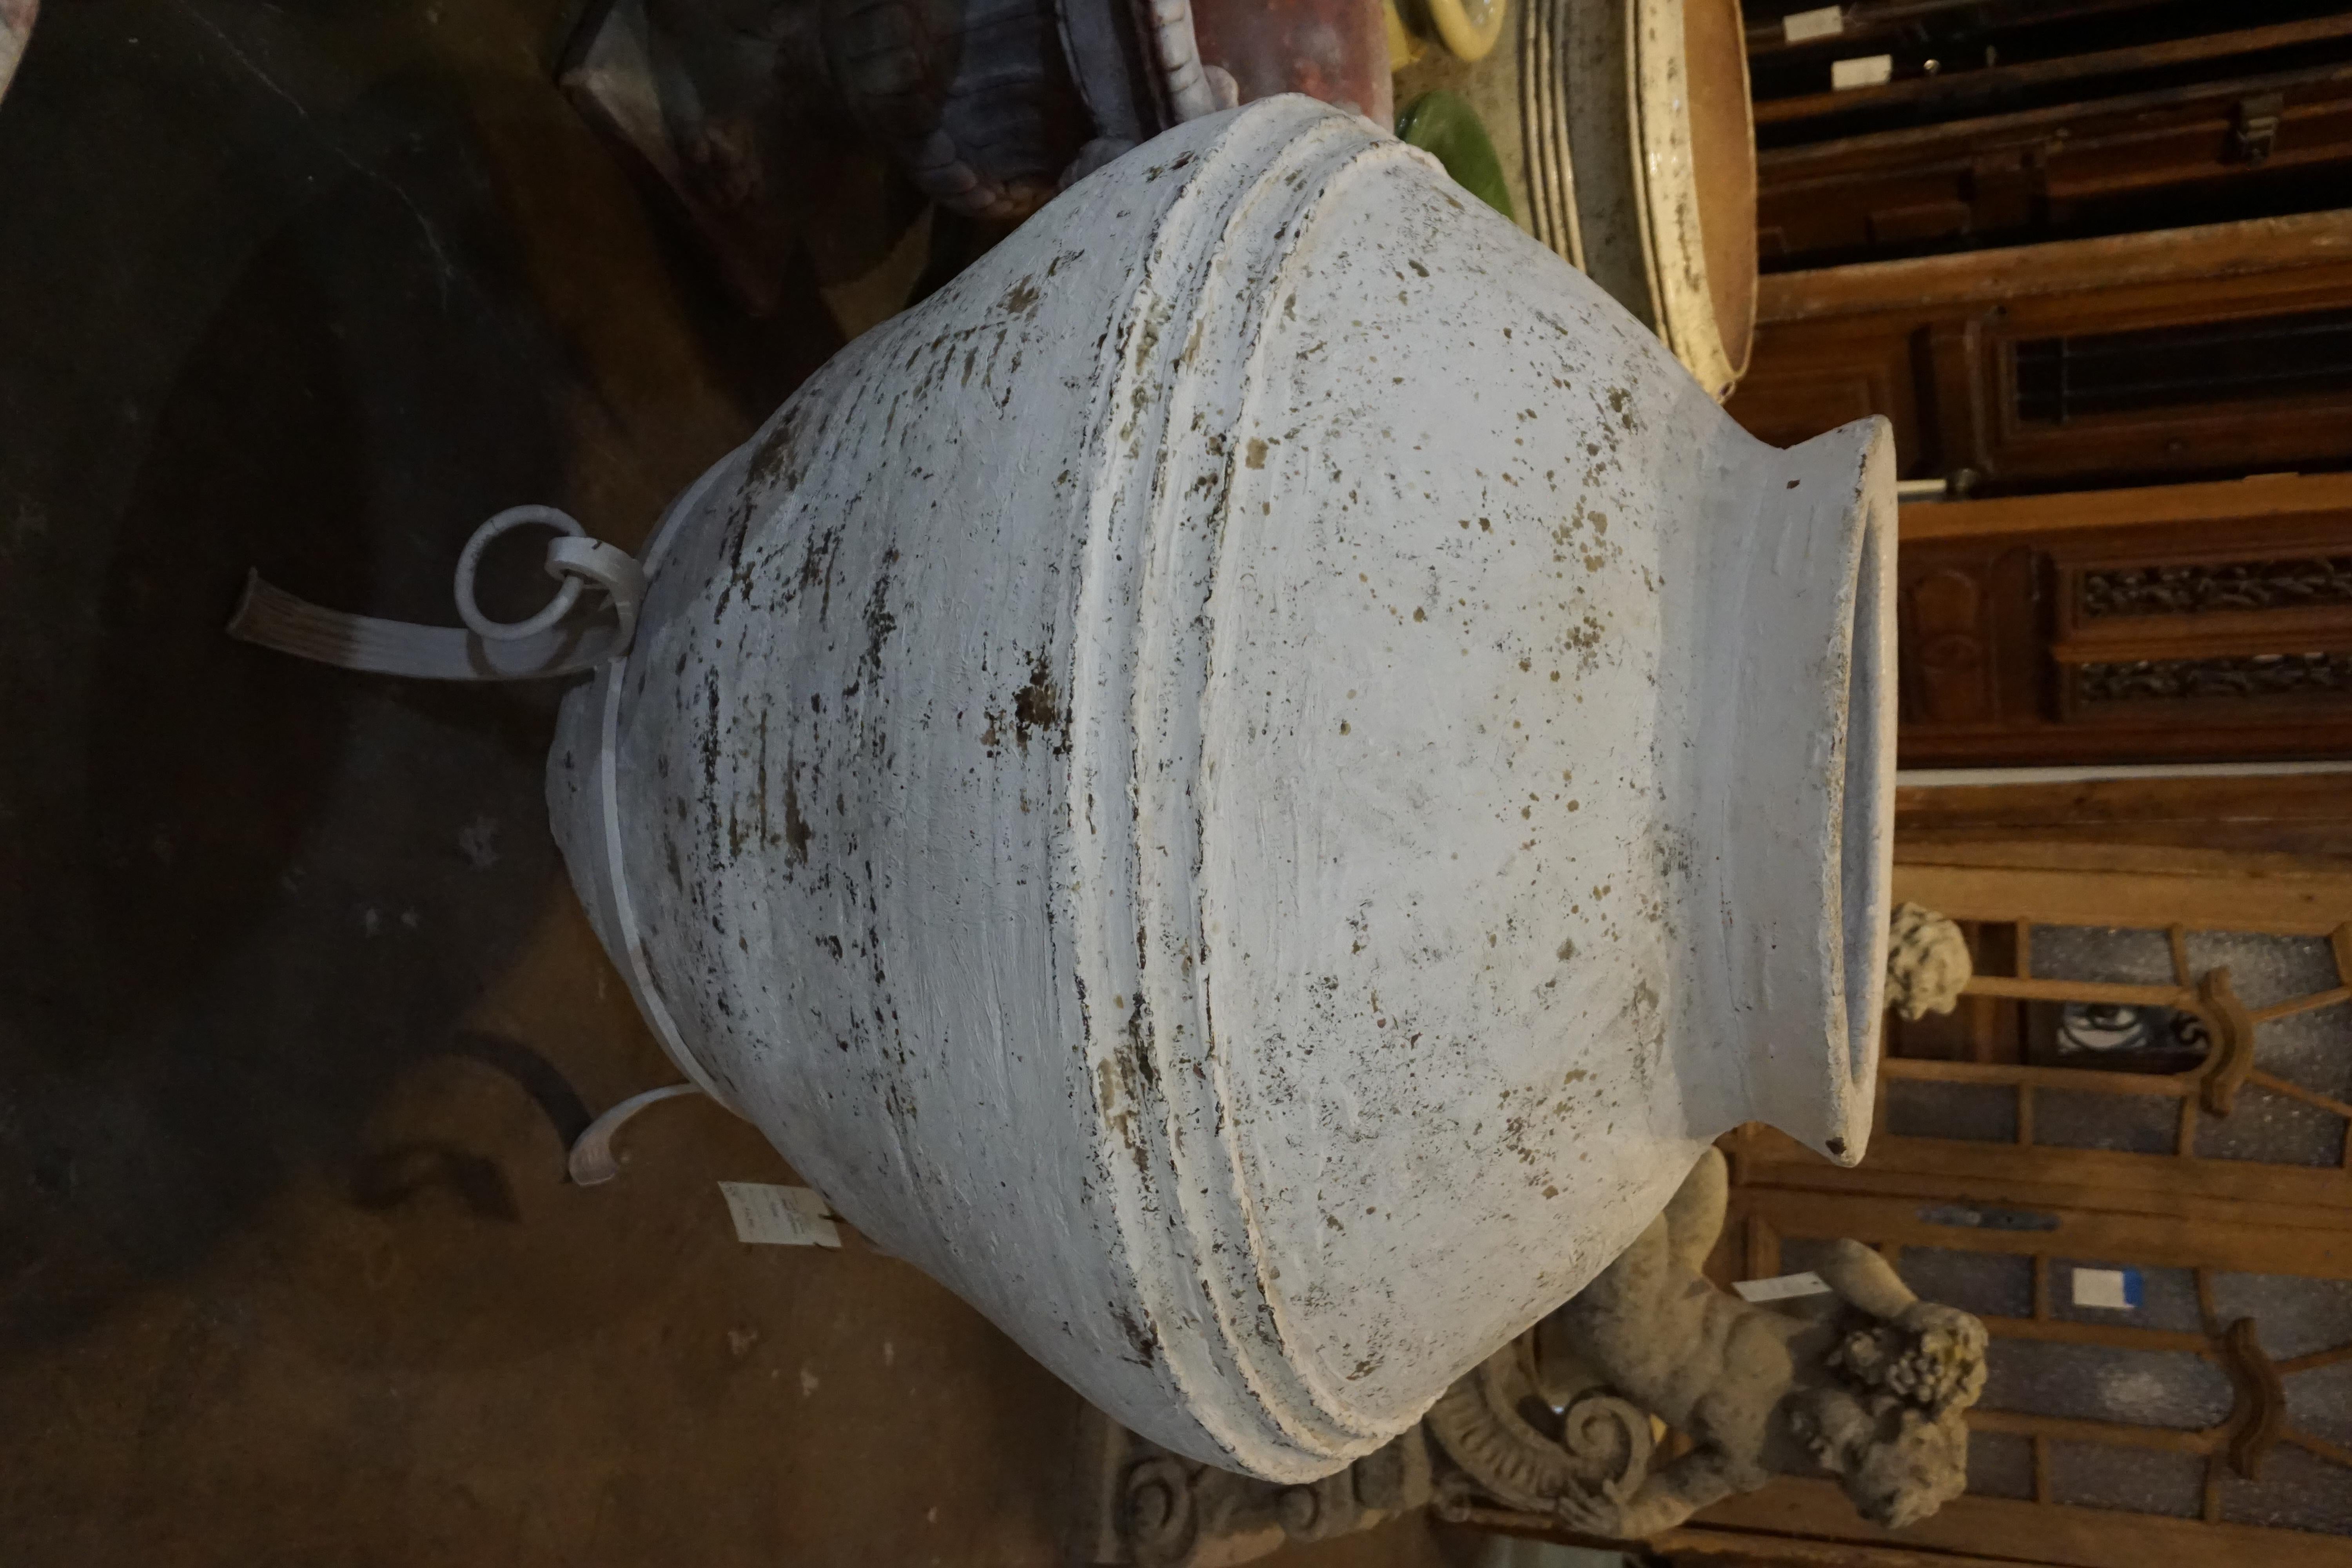 Large white vessel with stand

Measurements: 40.75